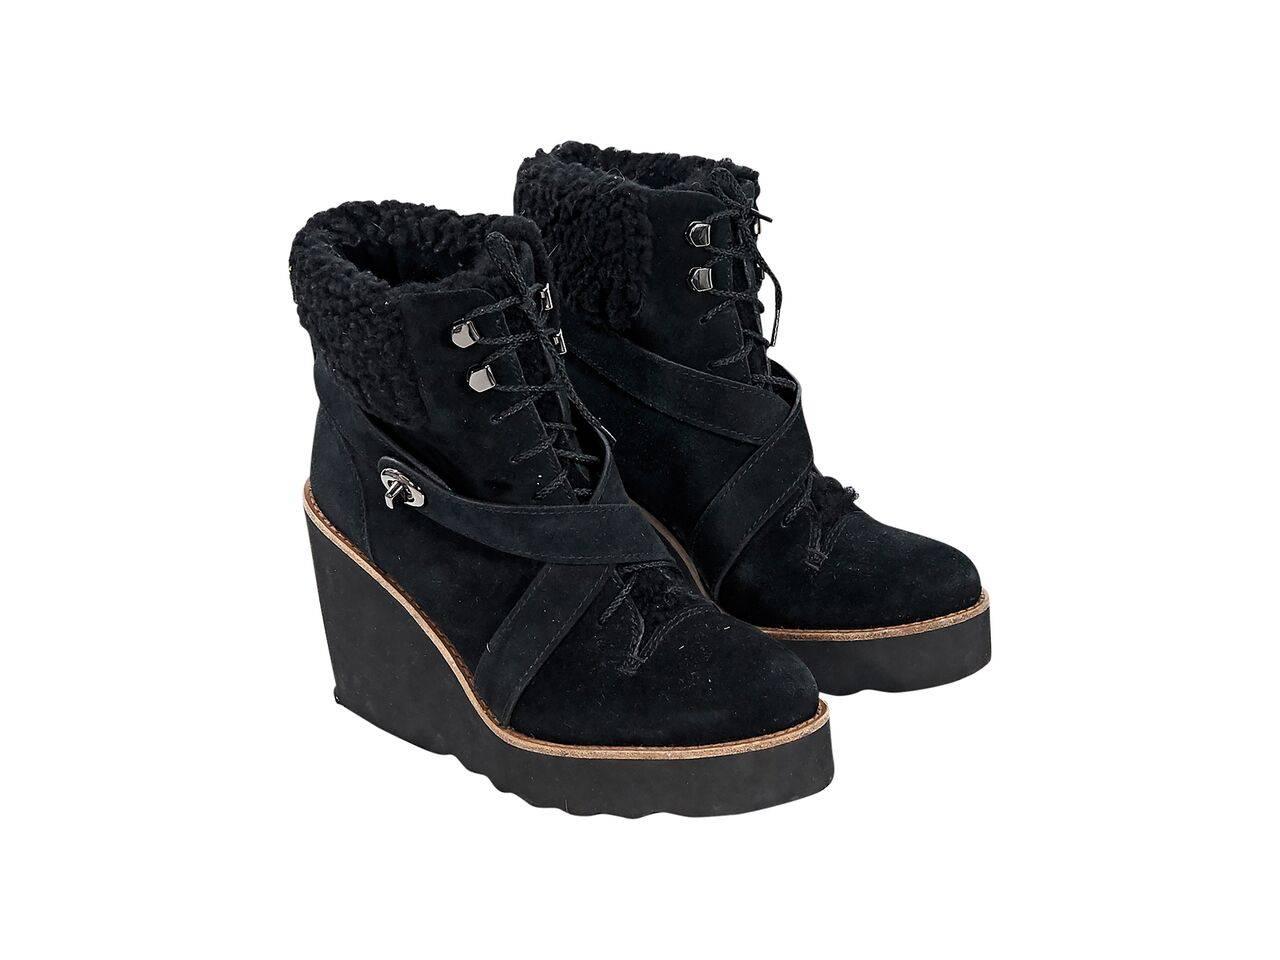 Product details:  Black suede wedge ankle boots by Coach.  Trimmed with shearling detail.  Crisscross instep buckle straps with twist-lock closure.  Lace-up front.  Round toe.  Silvertone hardware.
Condition: Pre-owned. Very good.
Est. Retail $